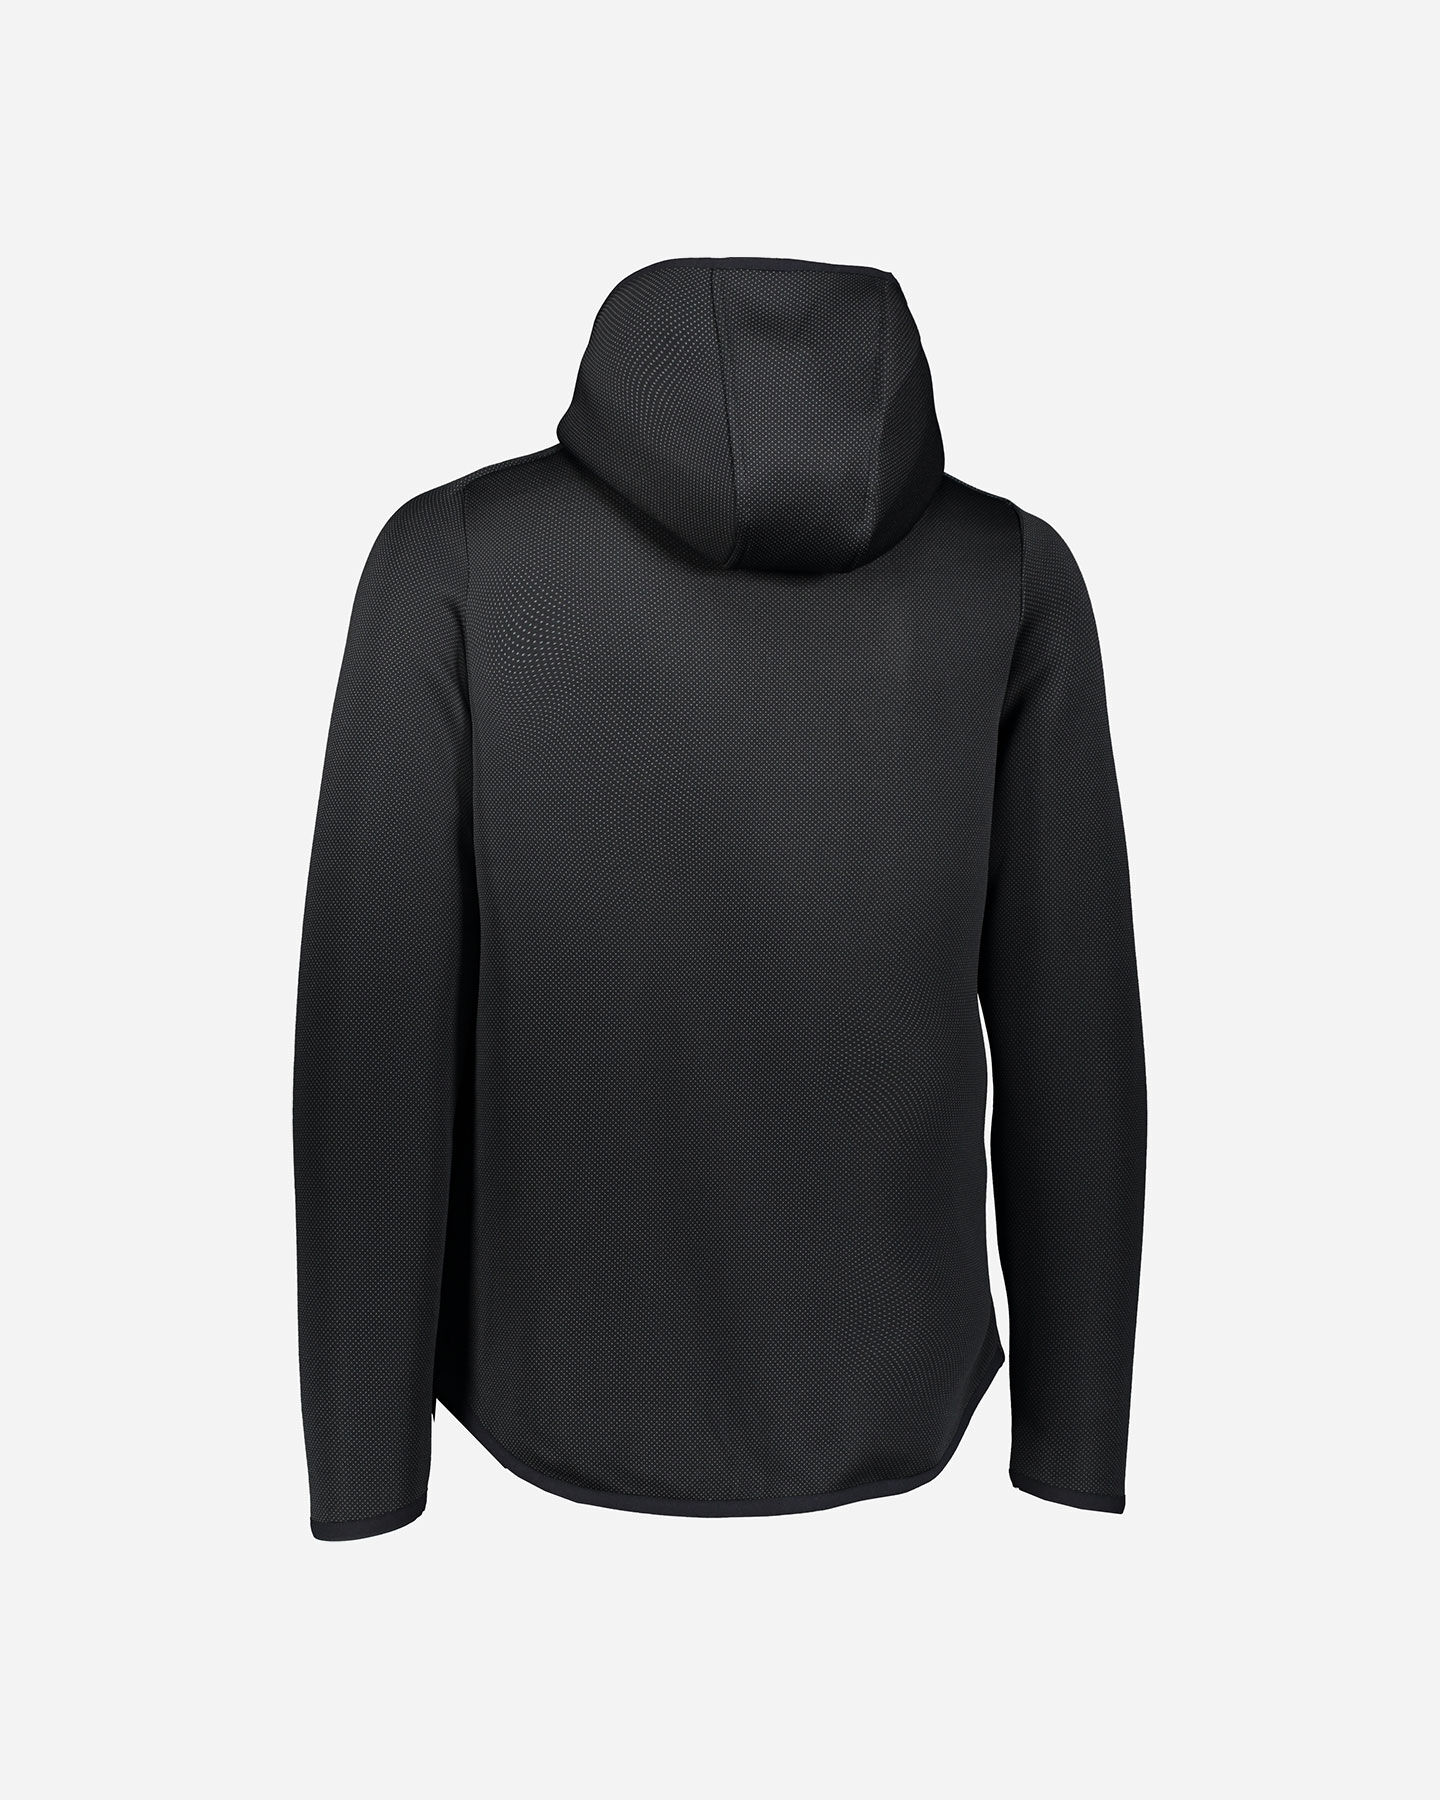  Felpa UNDER ARMOUR FZ HOODIE MOVE M S5169476|0001|XS scatto 1